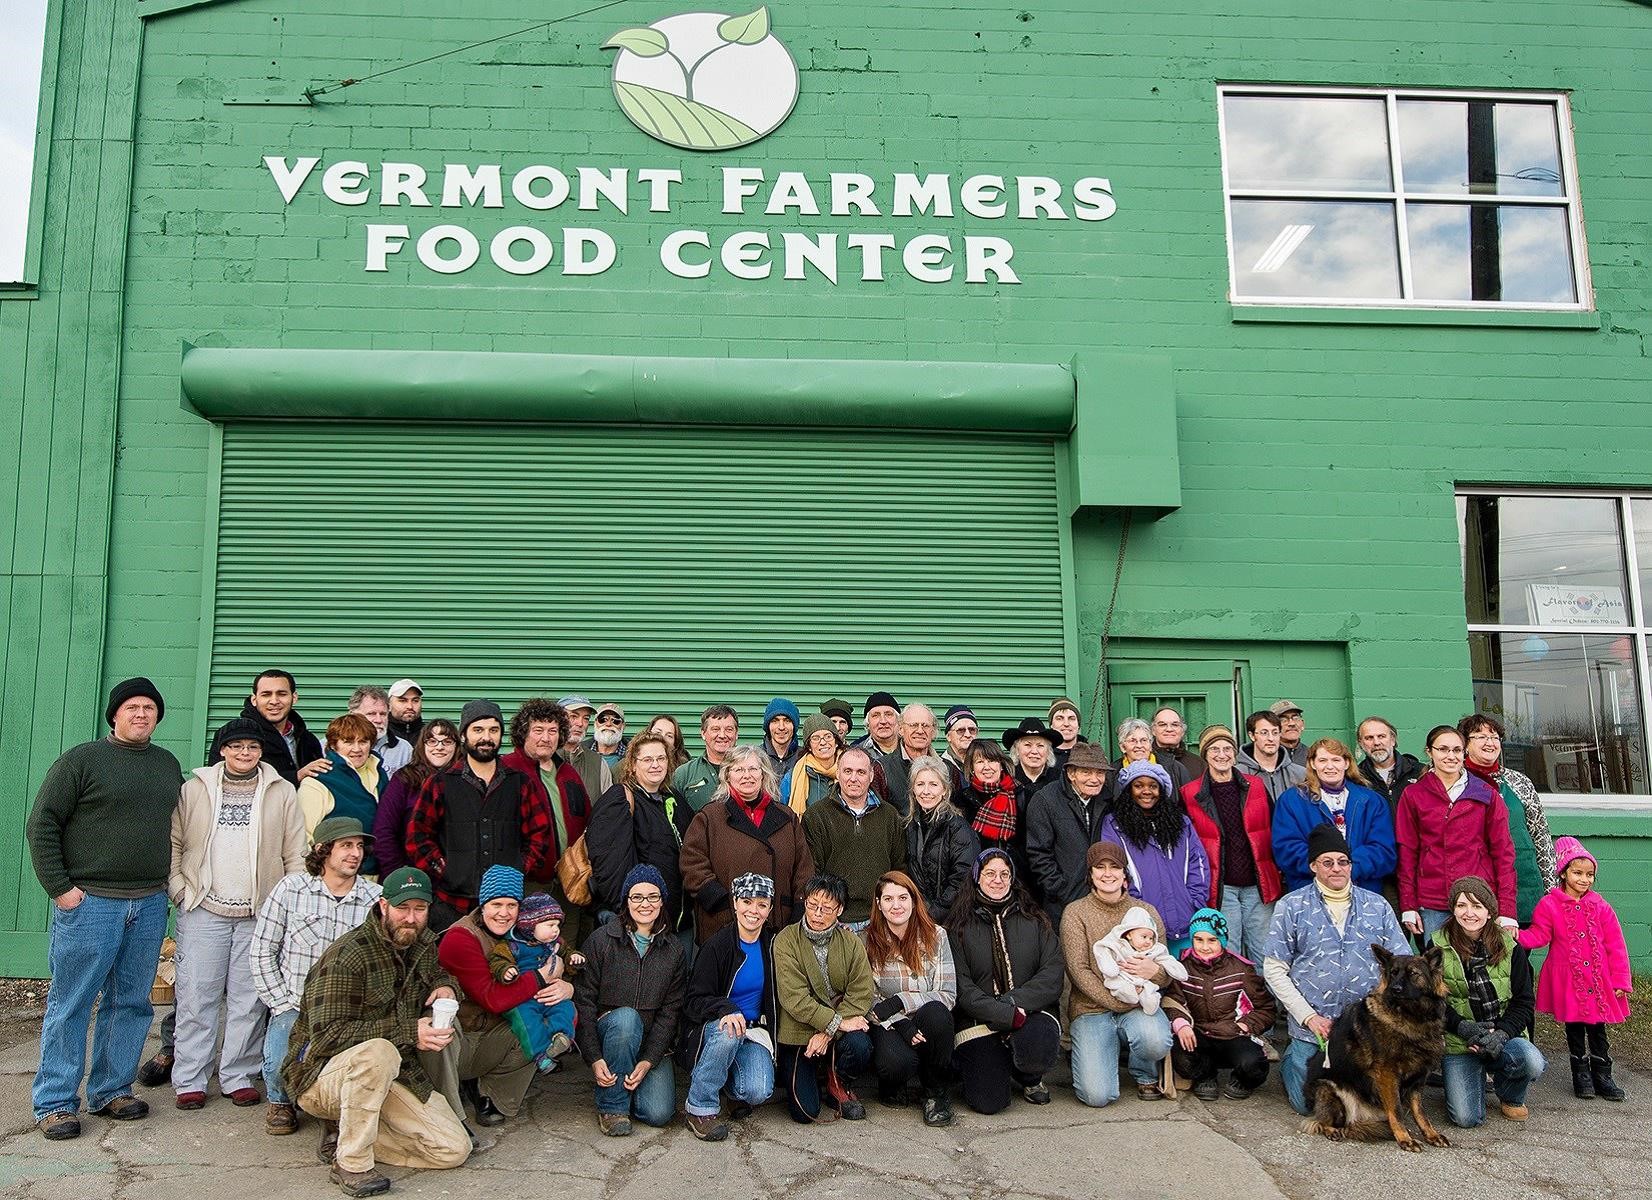 A group of people standing in front of the Vermont Farmers Food Center warehouse